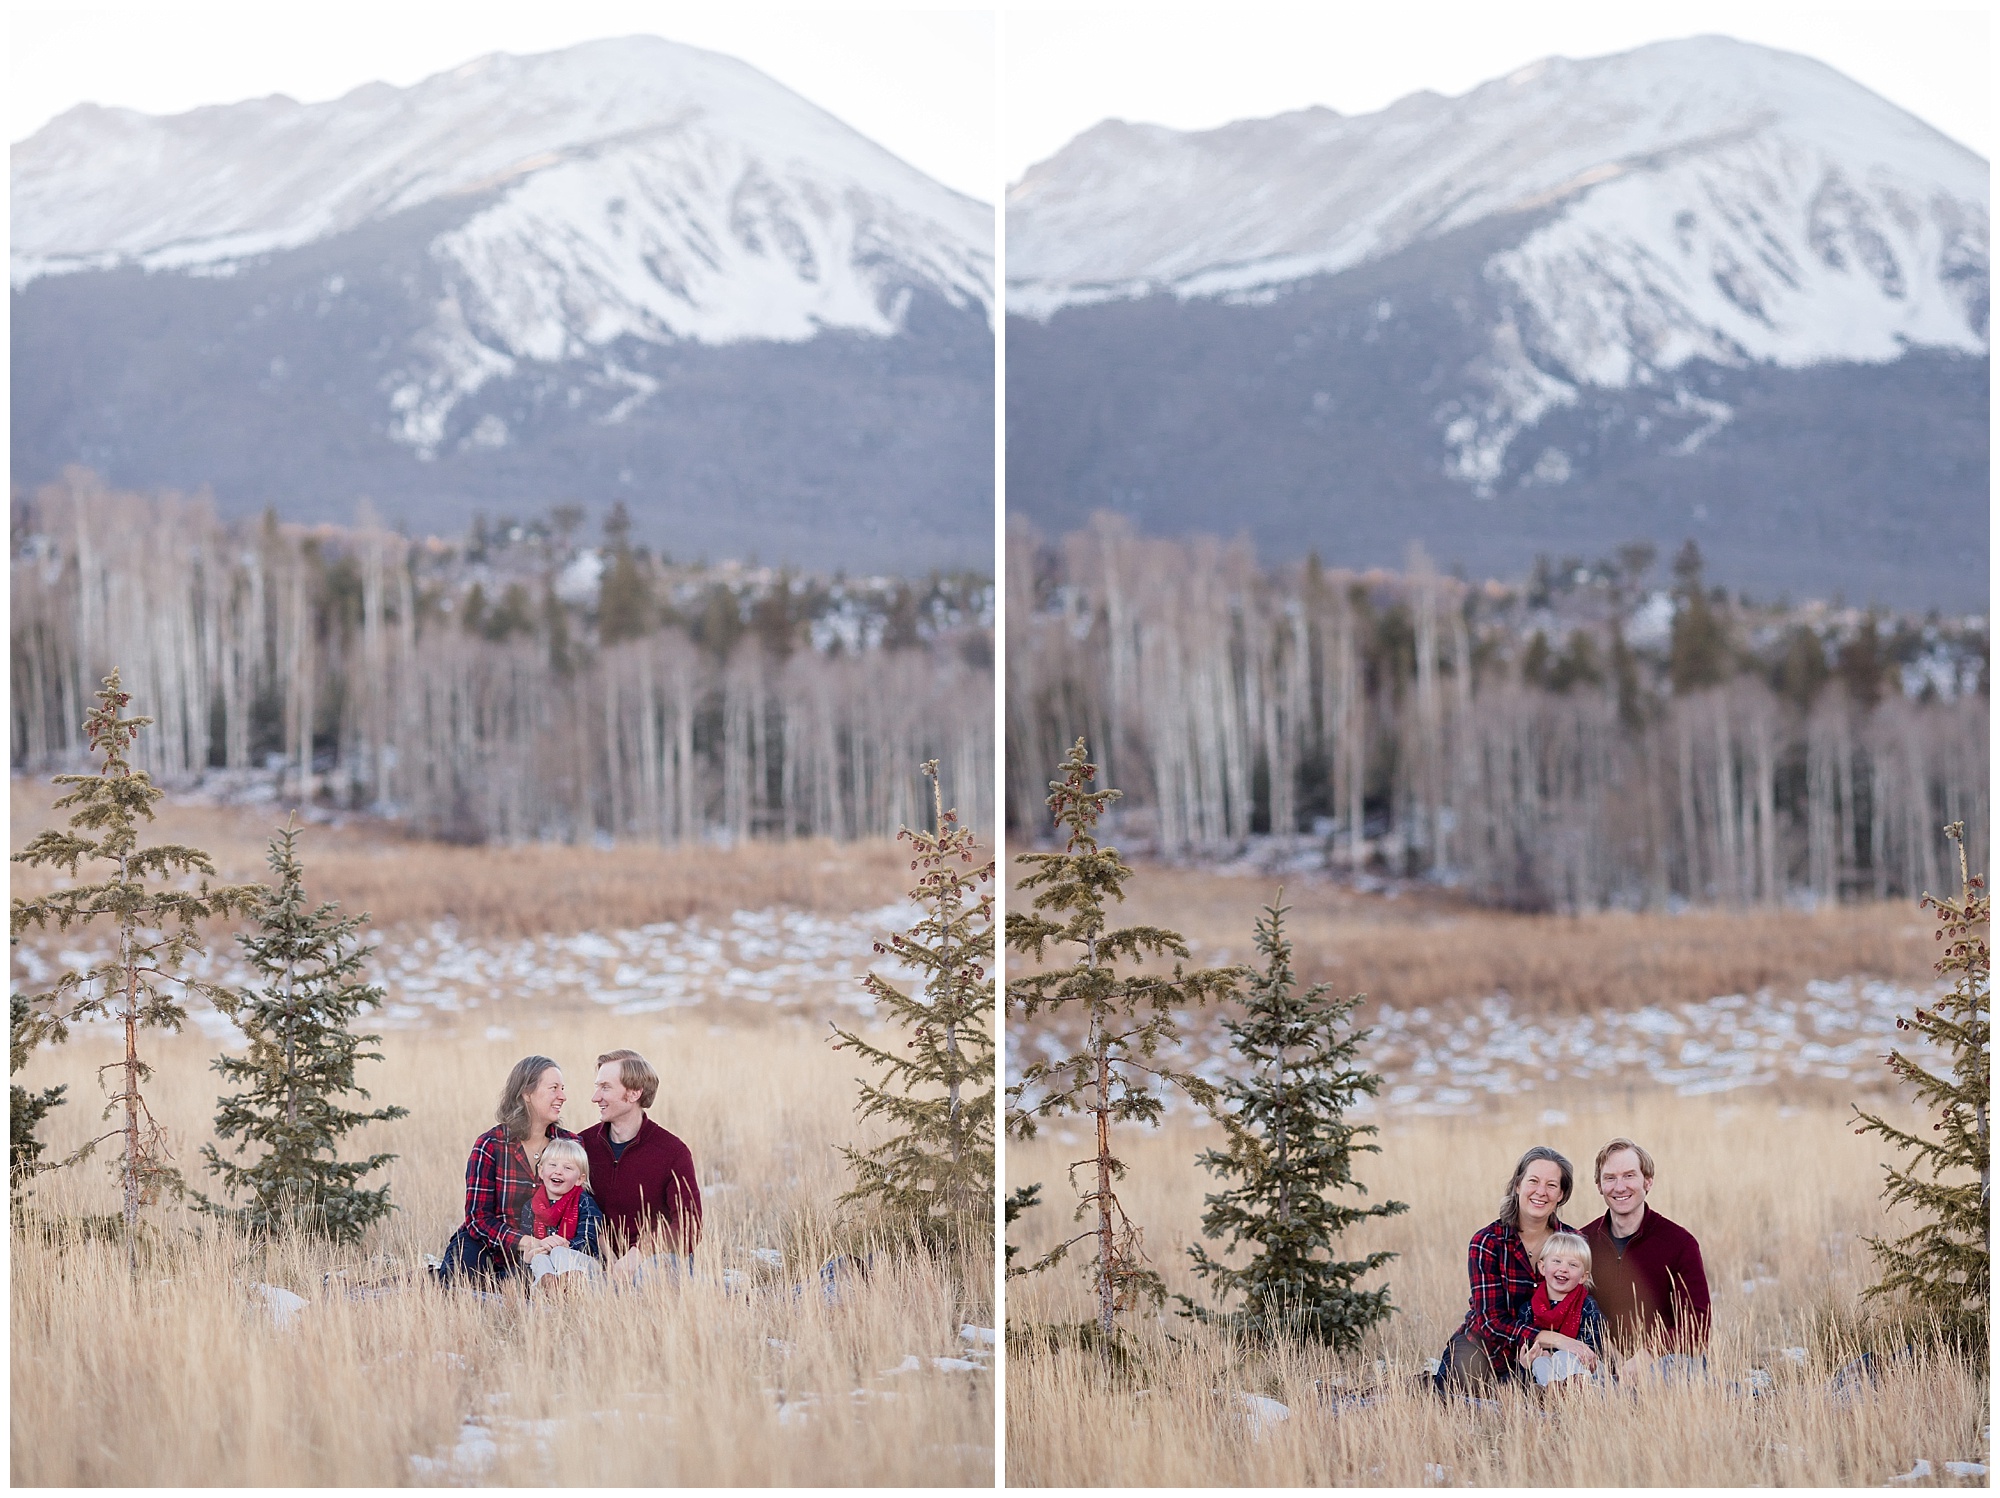 Family photo with a mountain backdrop during a Breckenridge photography session.